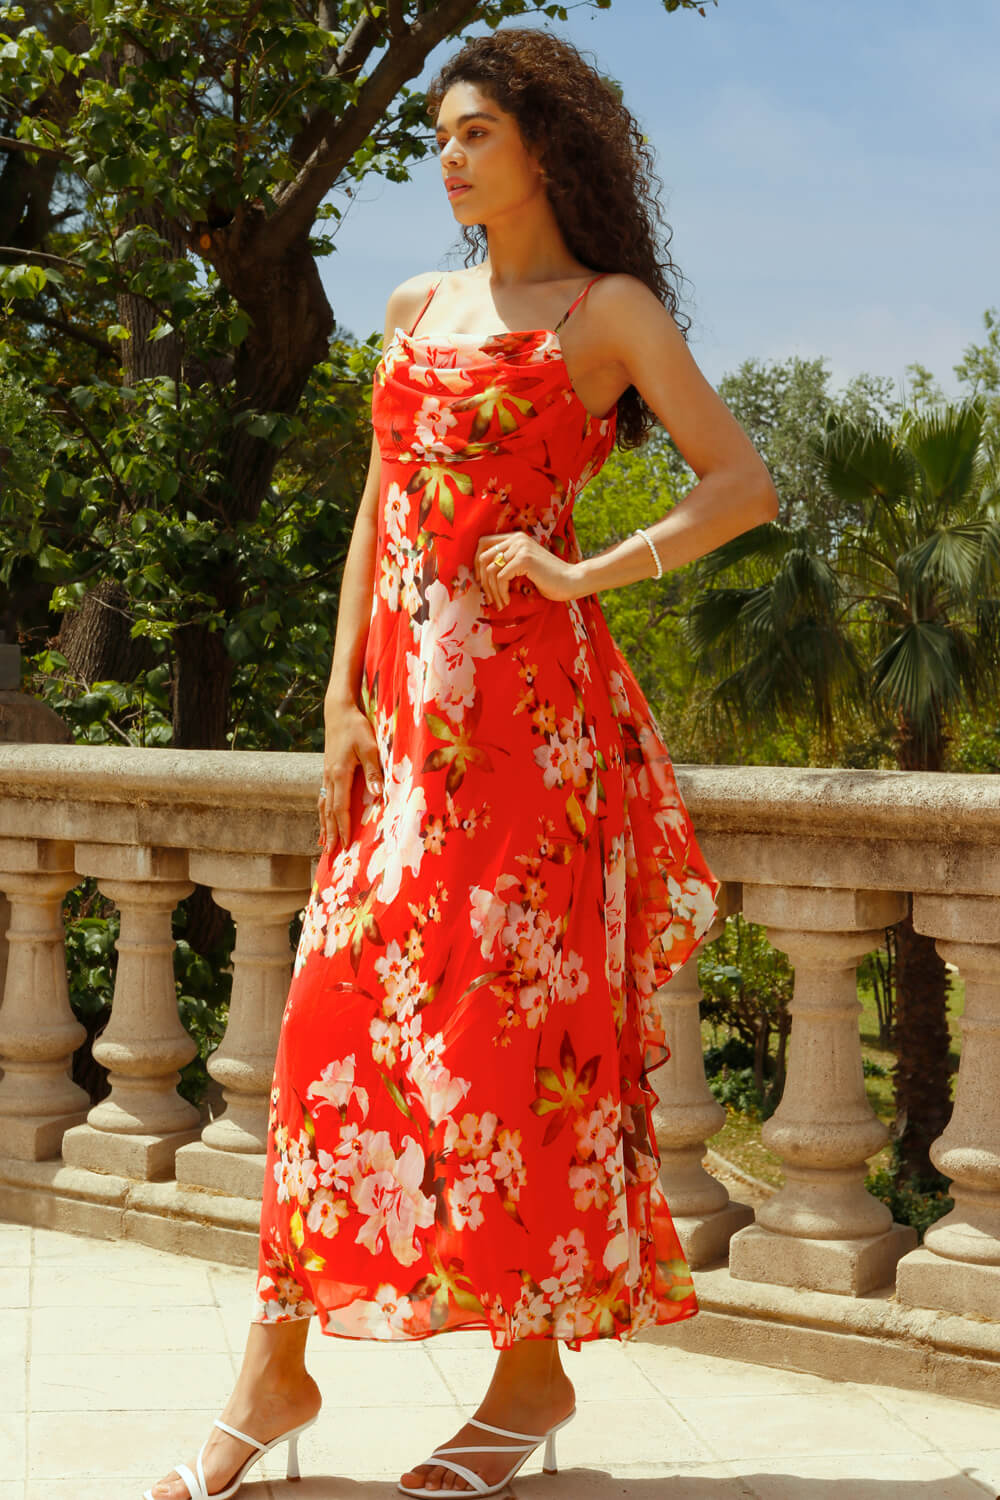 Red Floral Cowl Neck Chiffon Dress, Image 6 of 6